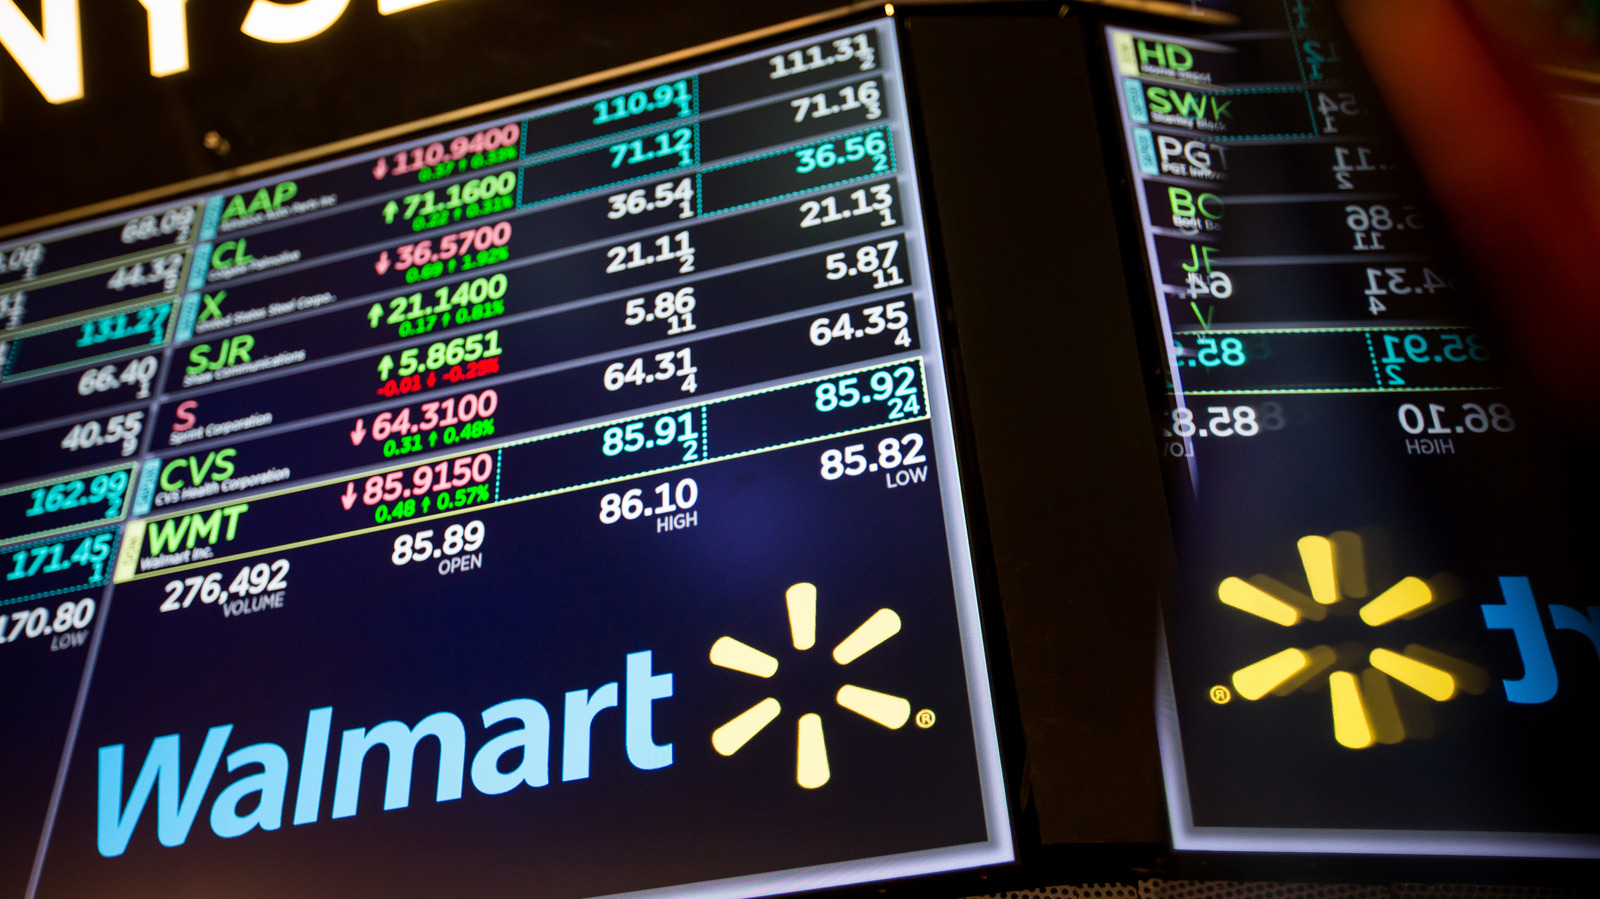 Walmart's Stock Just Seriously Plummeted. Here's Why.